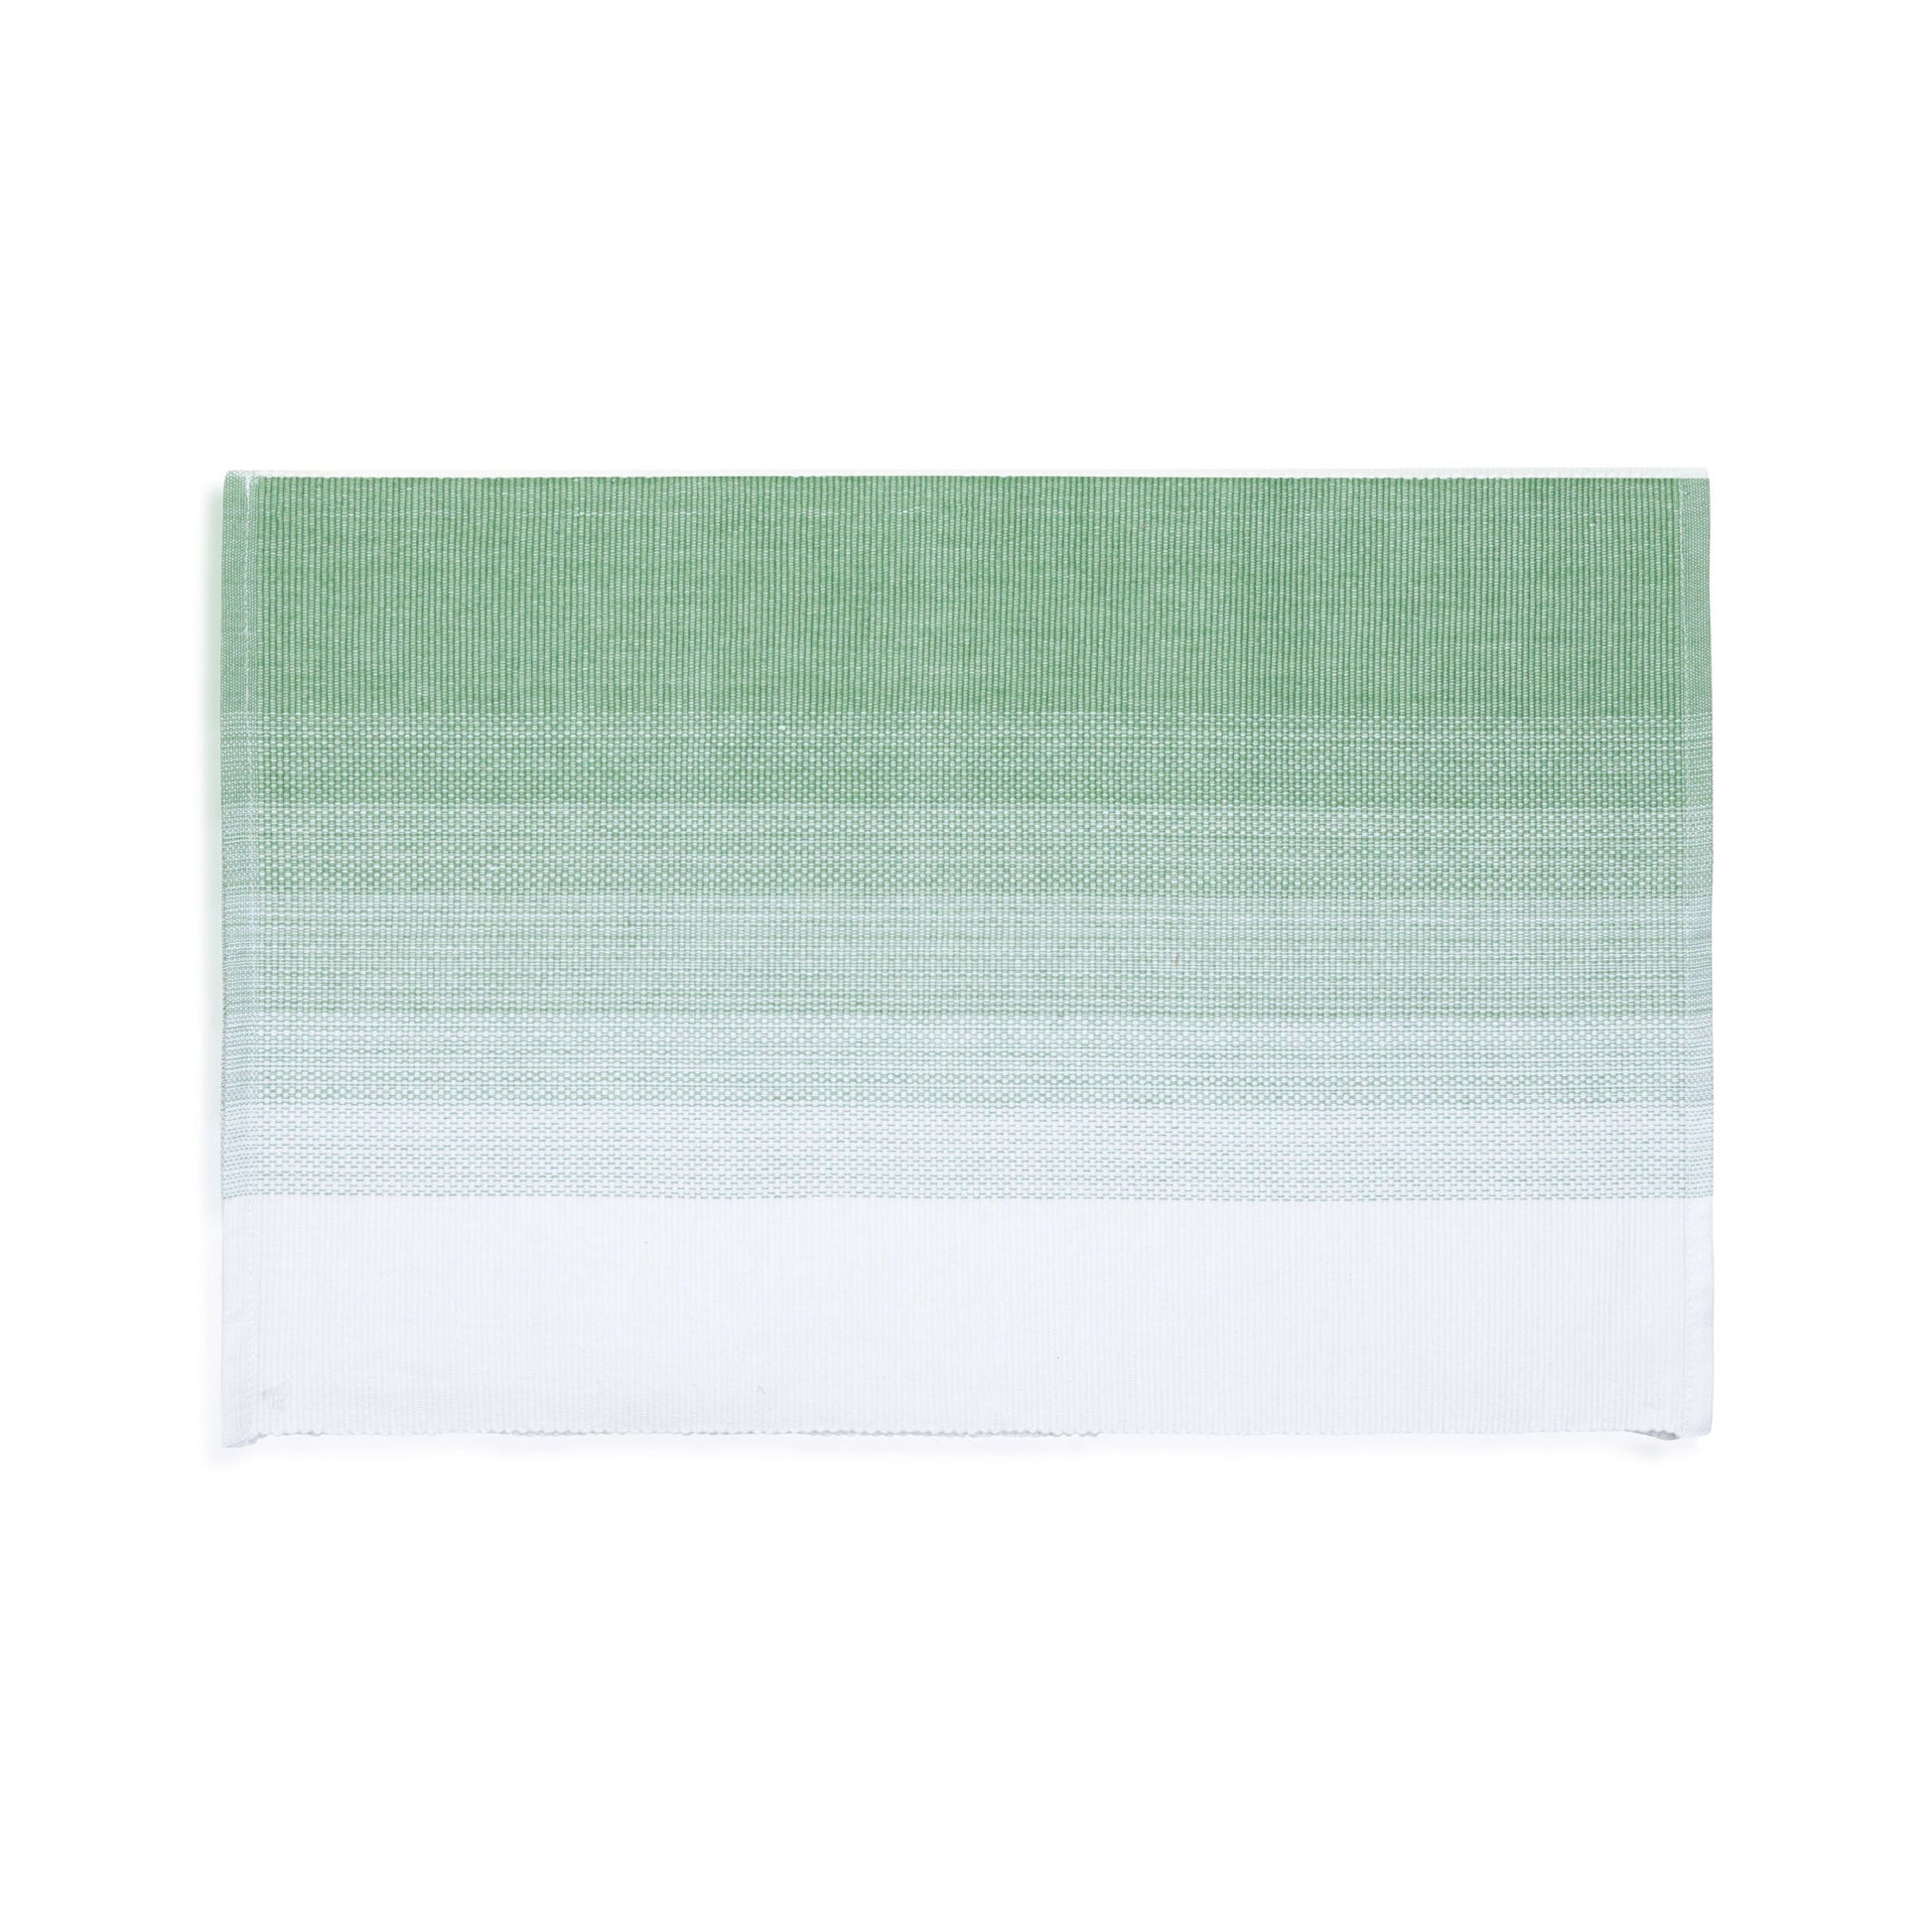 Green Ombre Woven Placemat